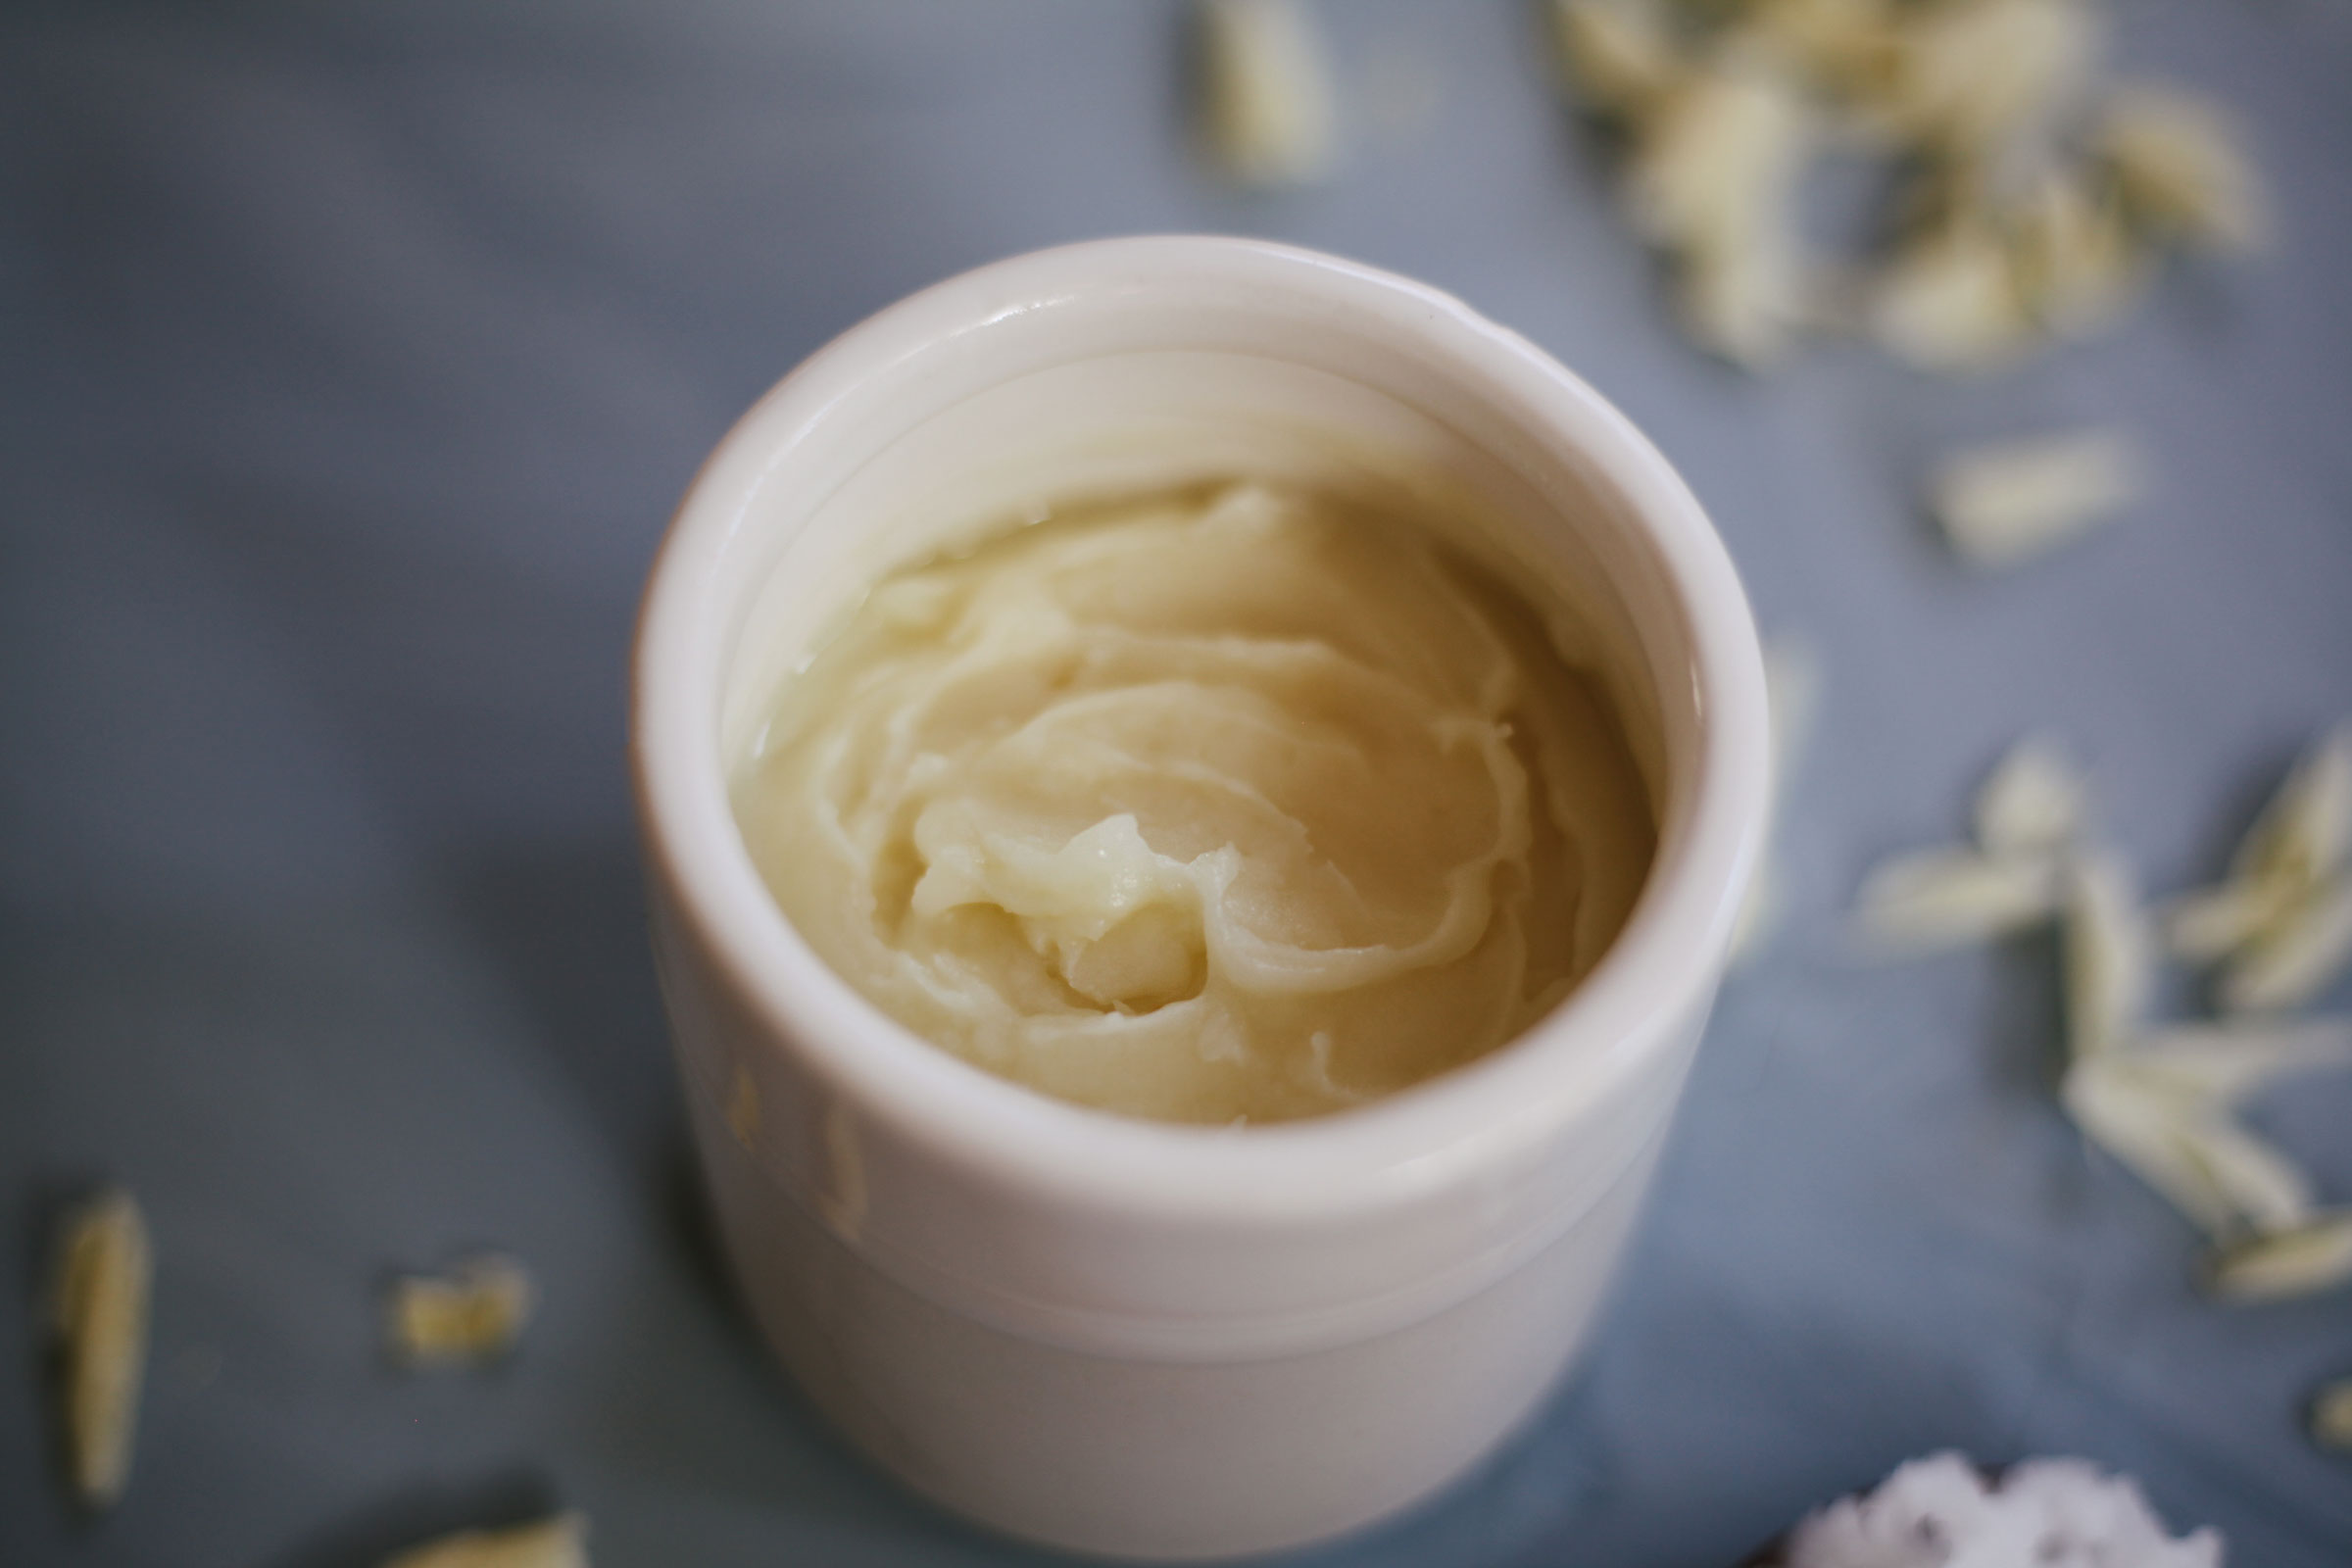 How to Make Your Own Coconut Oil Moisturizer